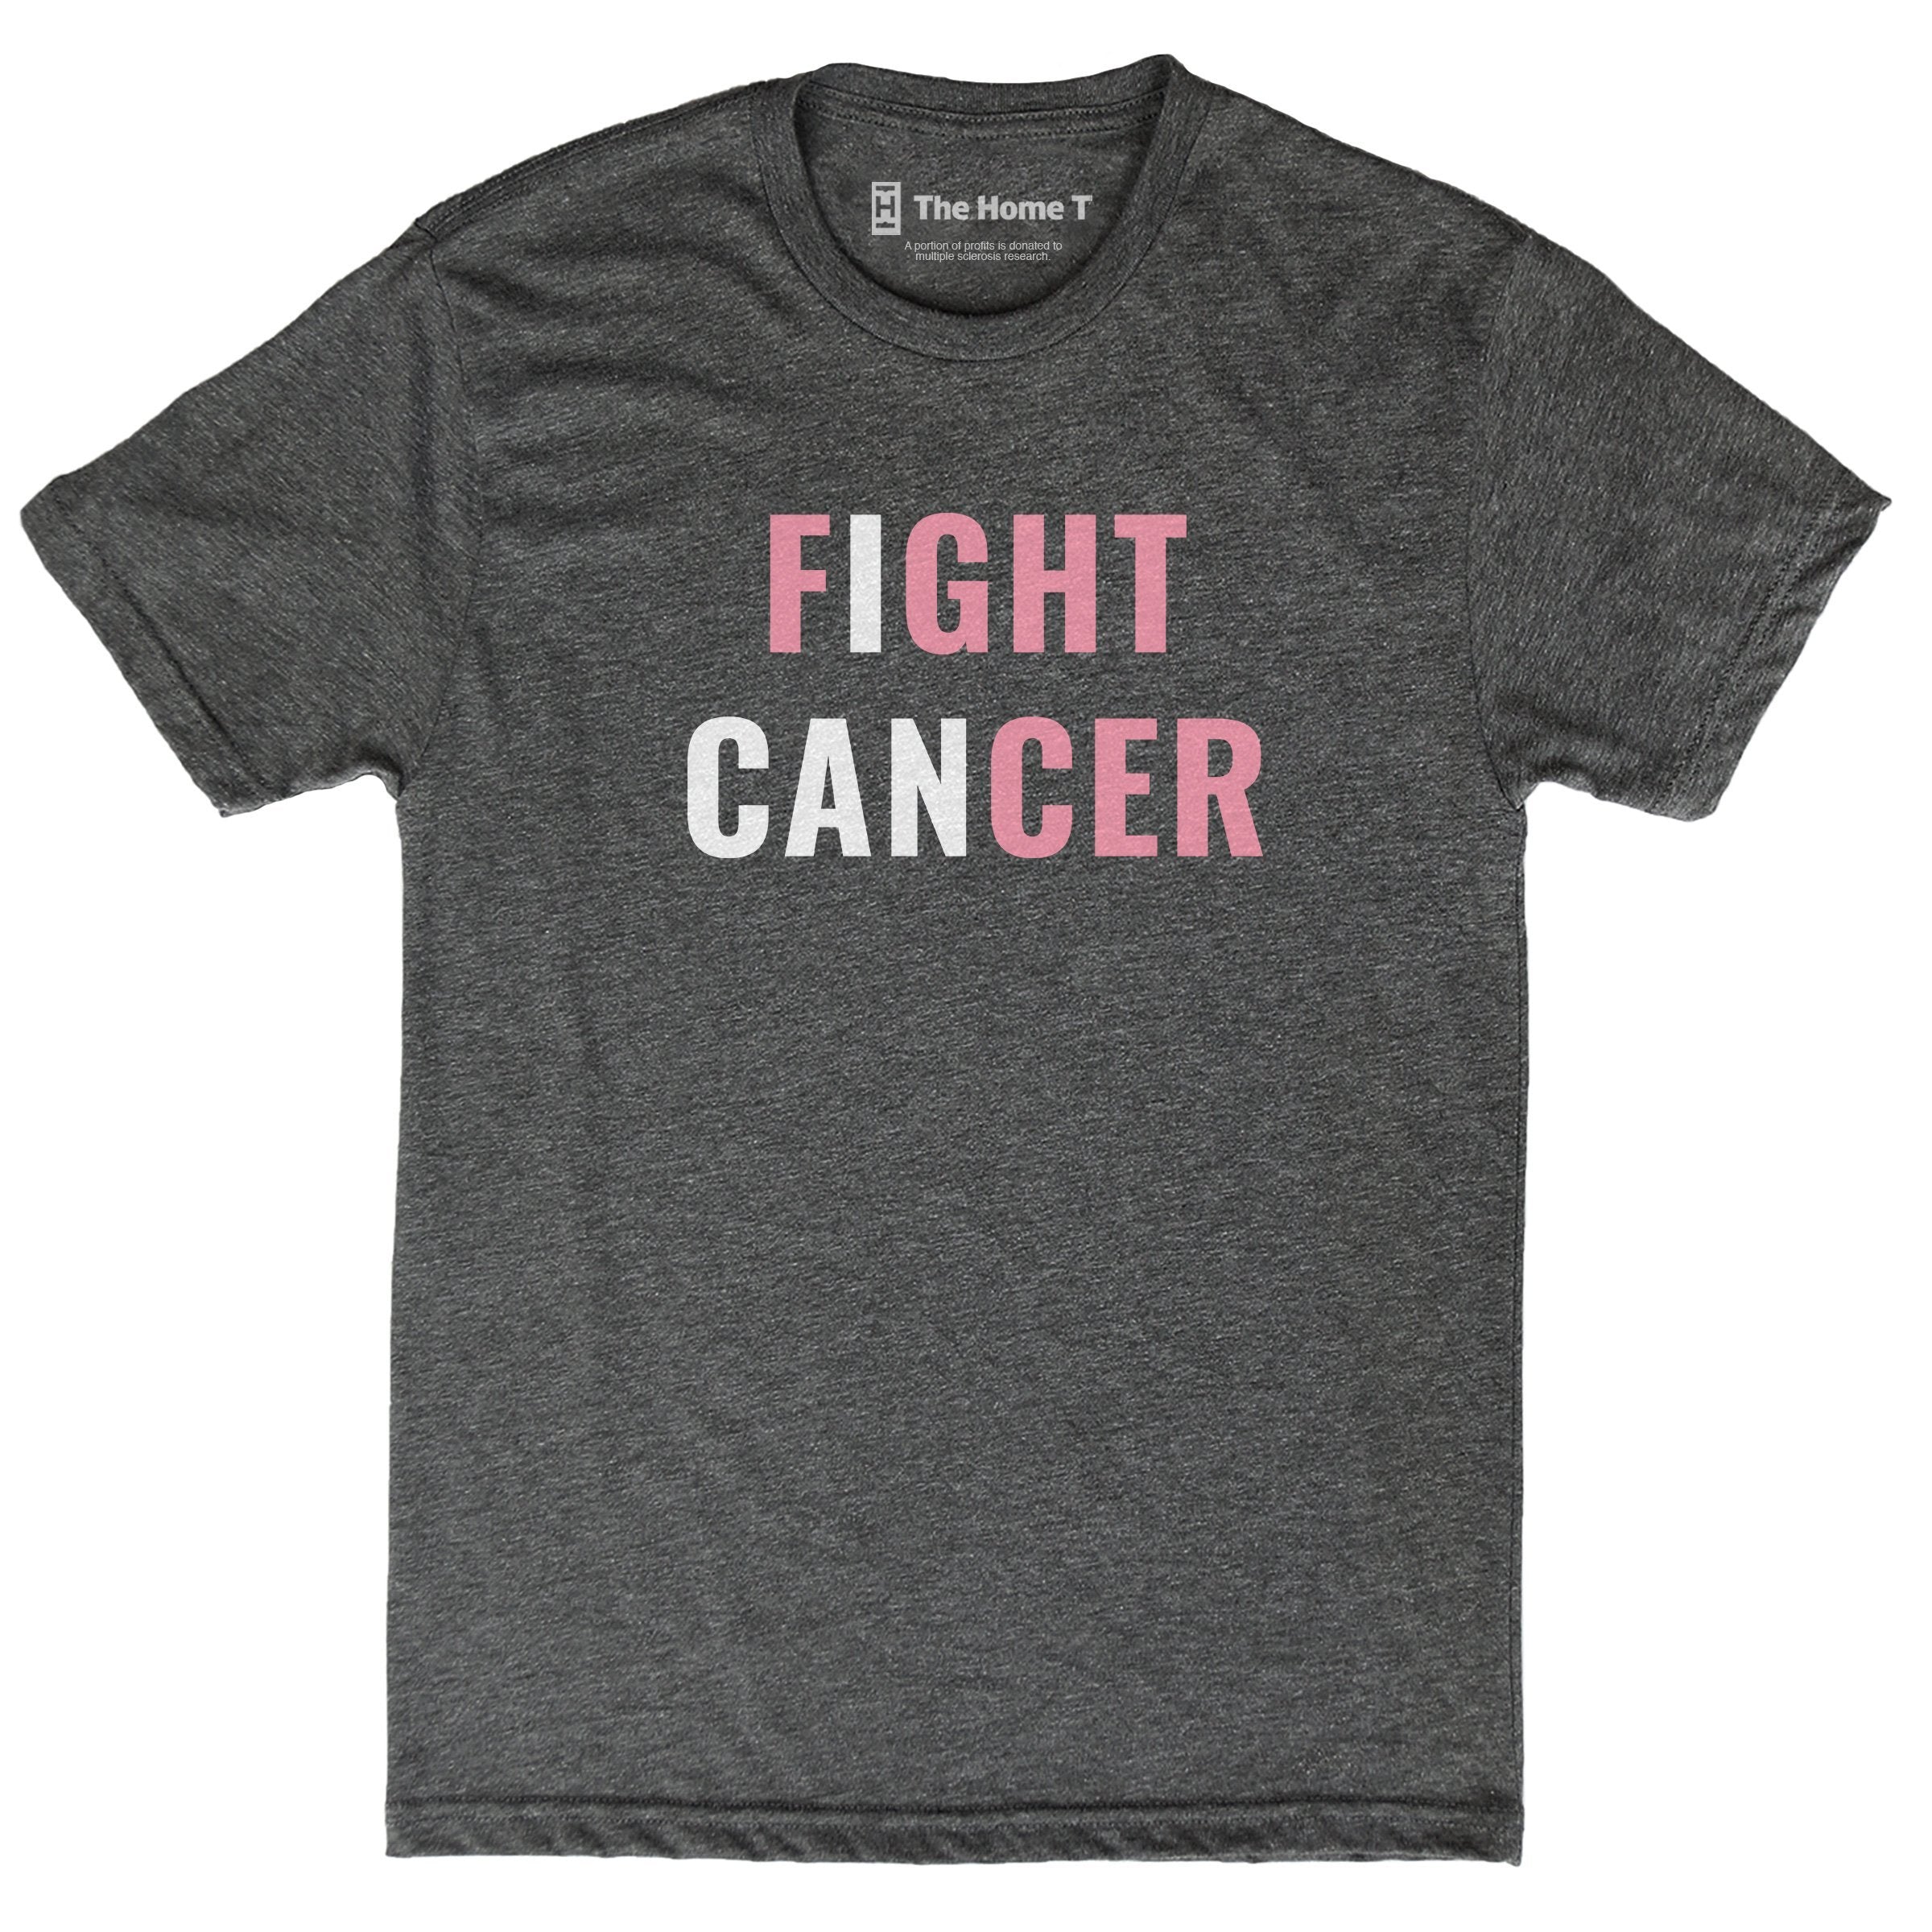 Fight Cancer The Home T XS Crew Neck